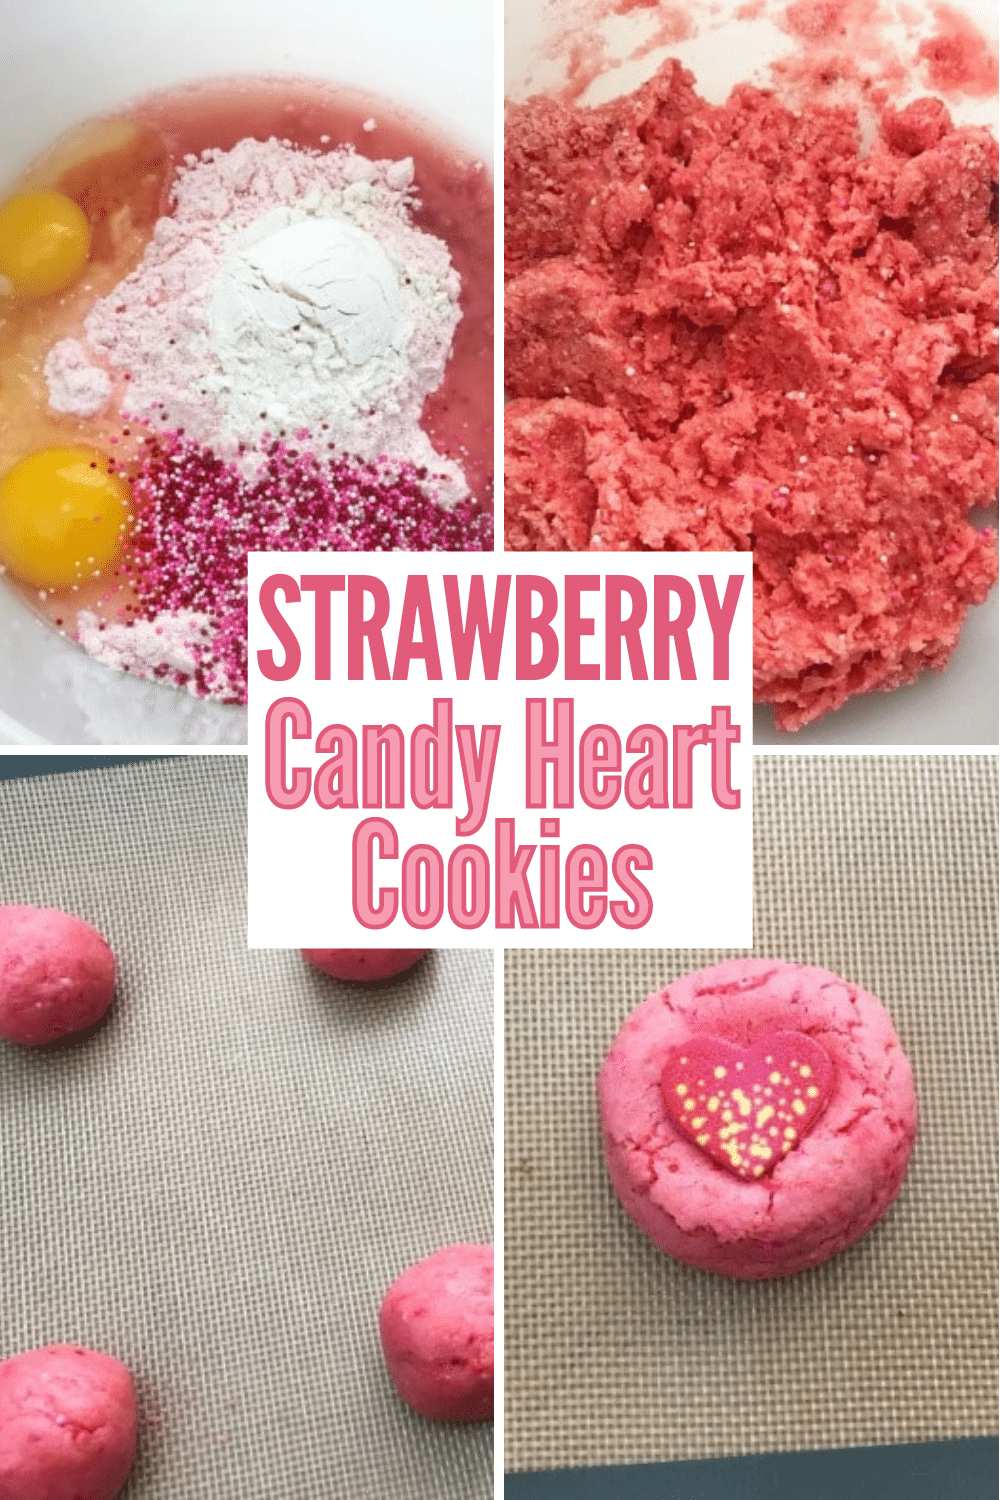 Strawberry Cake Mix Cookies are the perfect treat for Valentine's Day. They are perfect to share with friends and family. #cookies #ValentinesDay #strawberry #strawberrycakemixcookies #cakemixcookies via @wondermomwannab